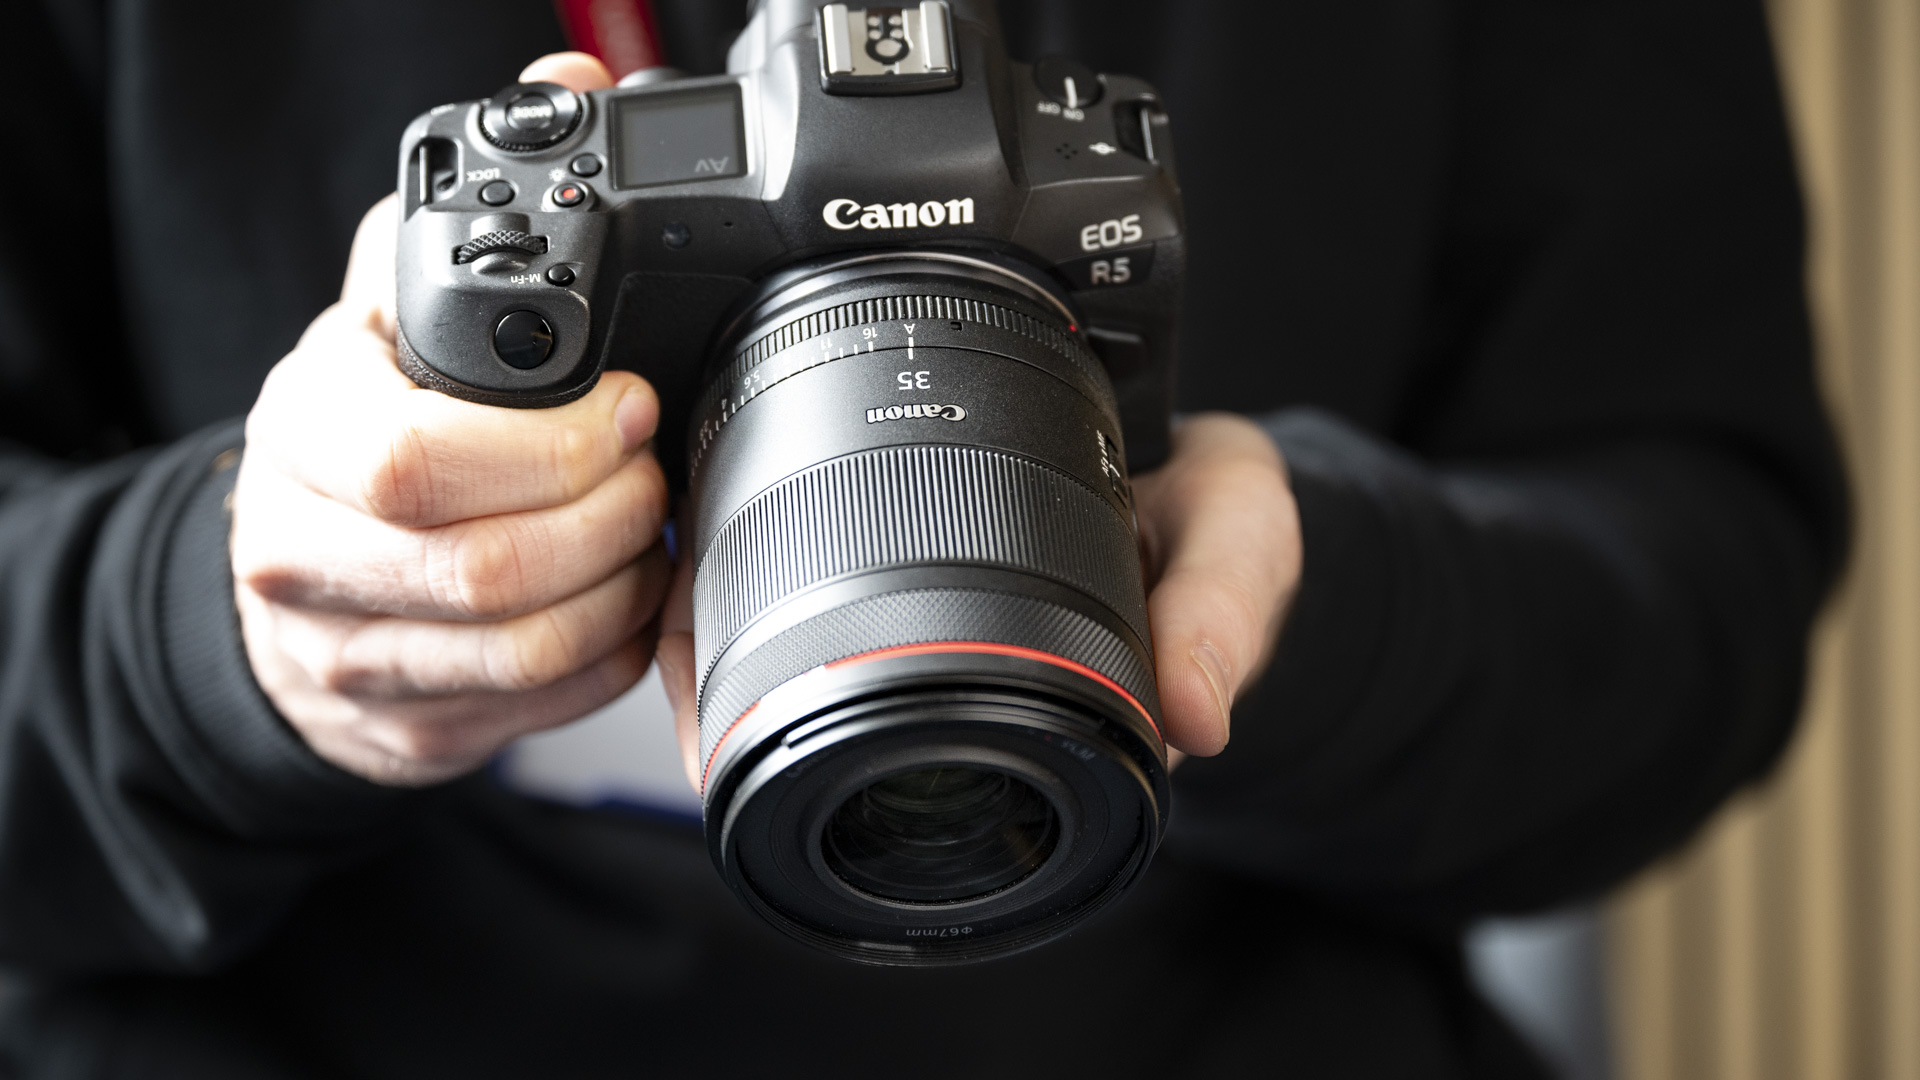 The Canon RF 35mm F1.4 lens attached to a Canon EOS R5, in hand